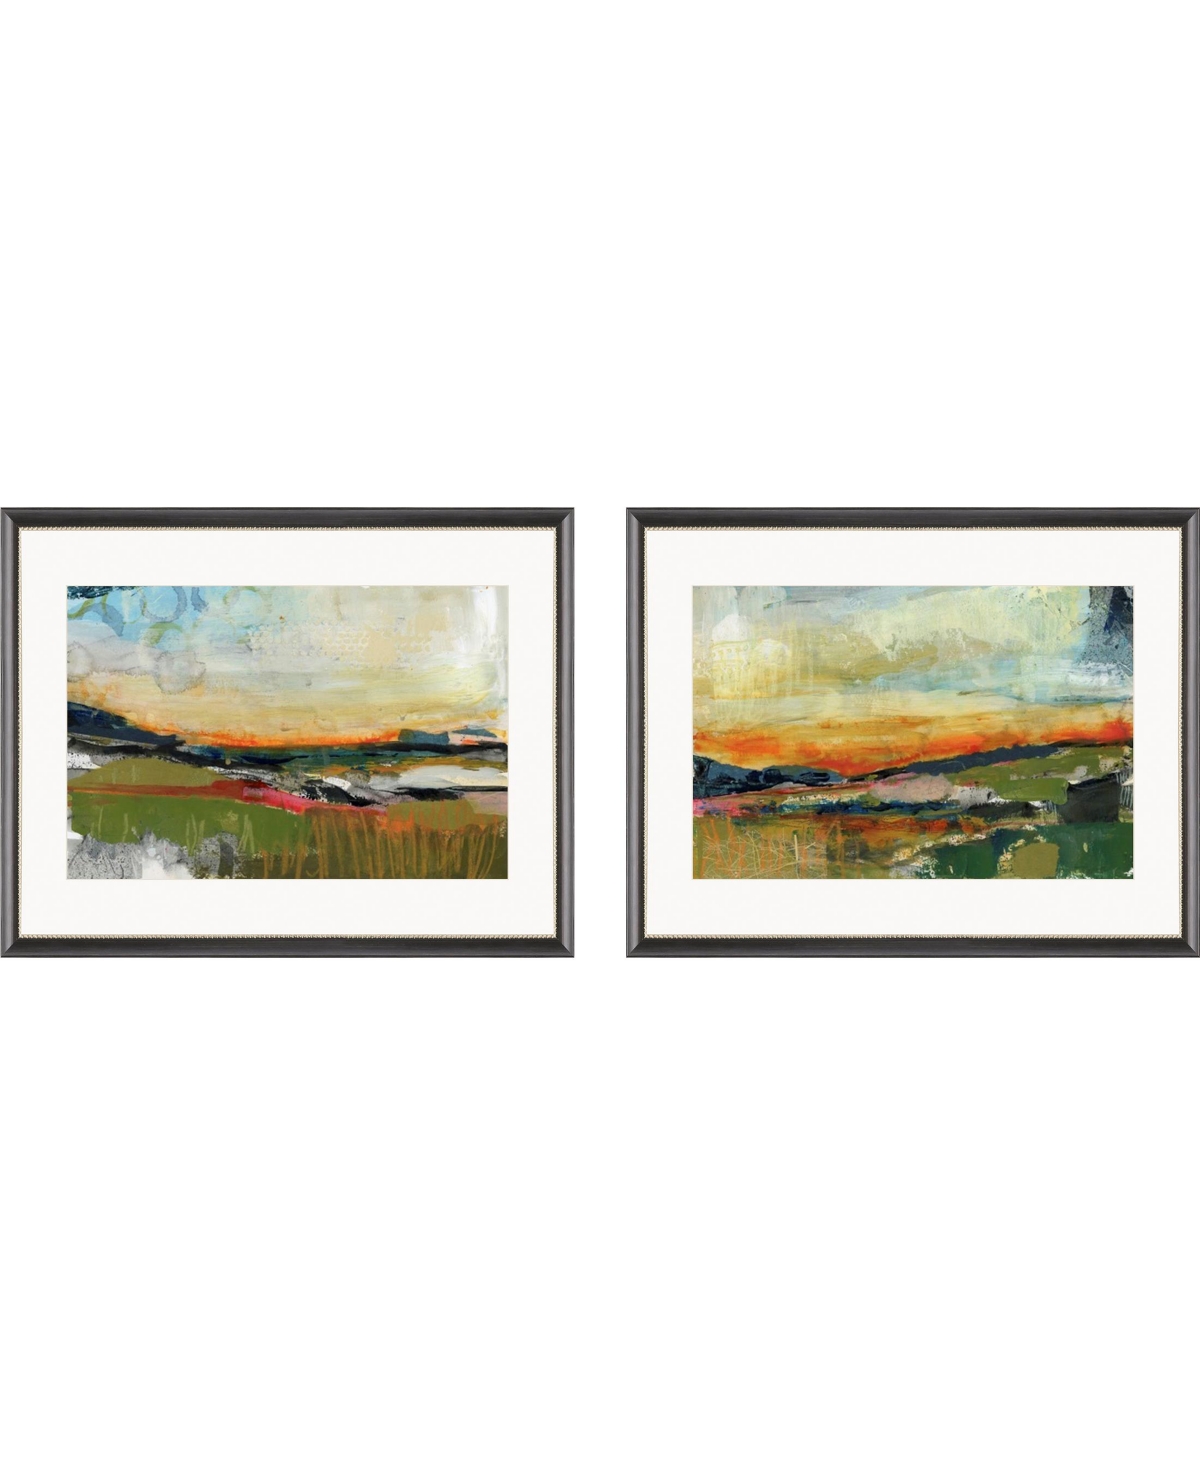 Paragon Picture Gallery Long Way Home I Framed Art, Set Of 2 In Green